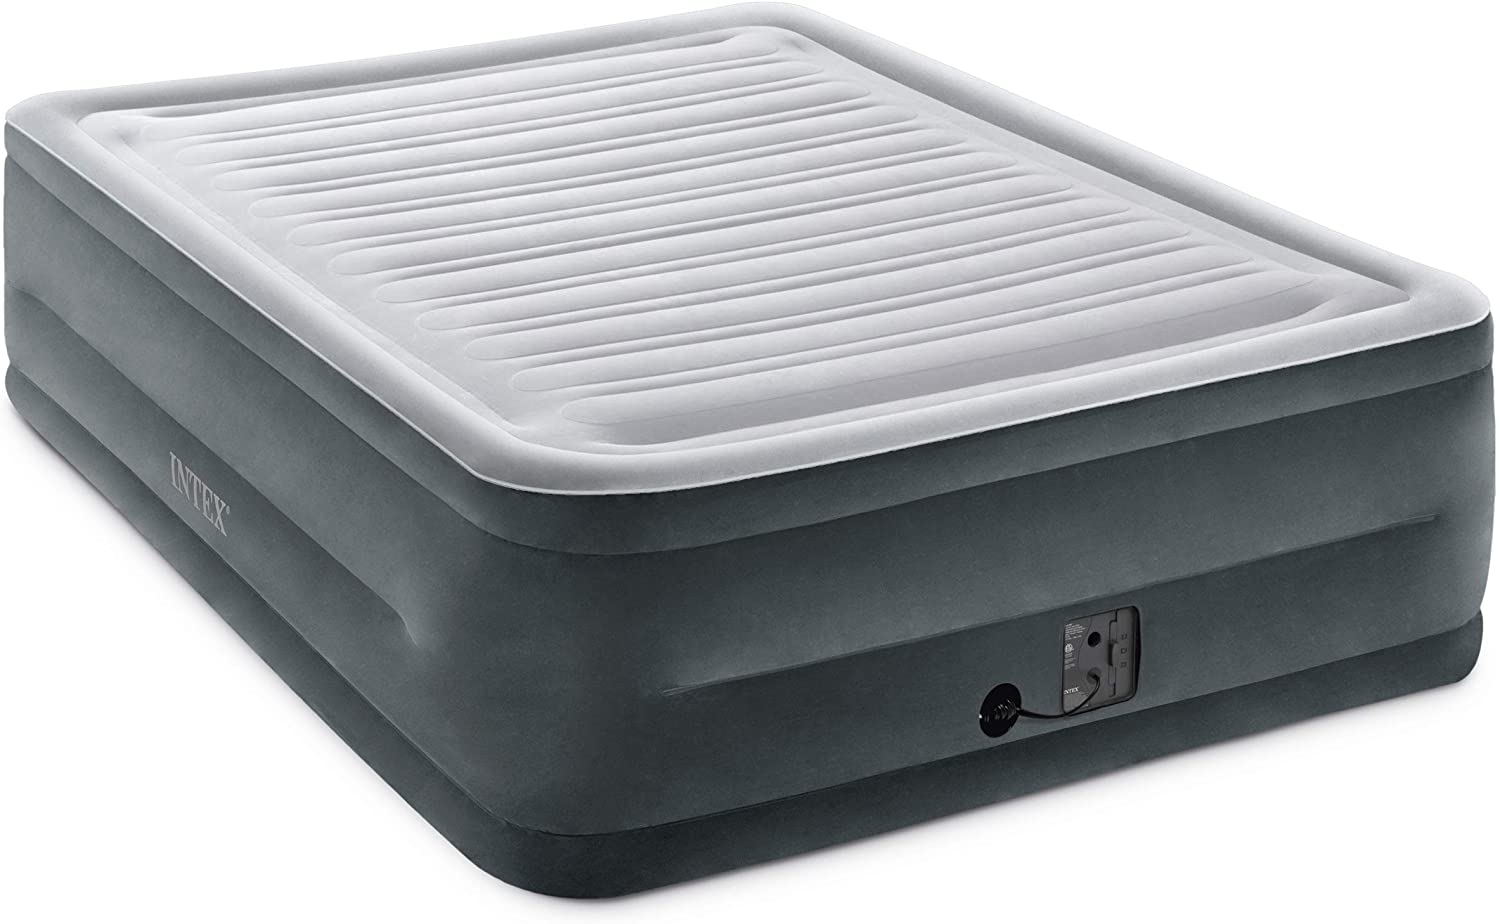 400 lbs capacity full-sized inflatable mattress